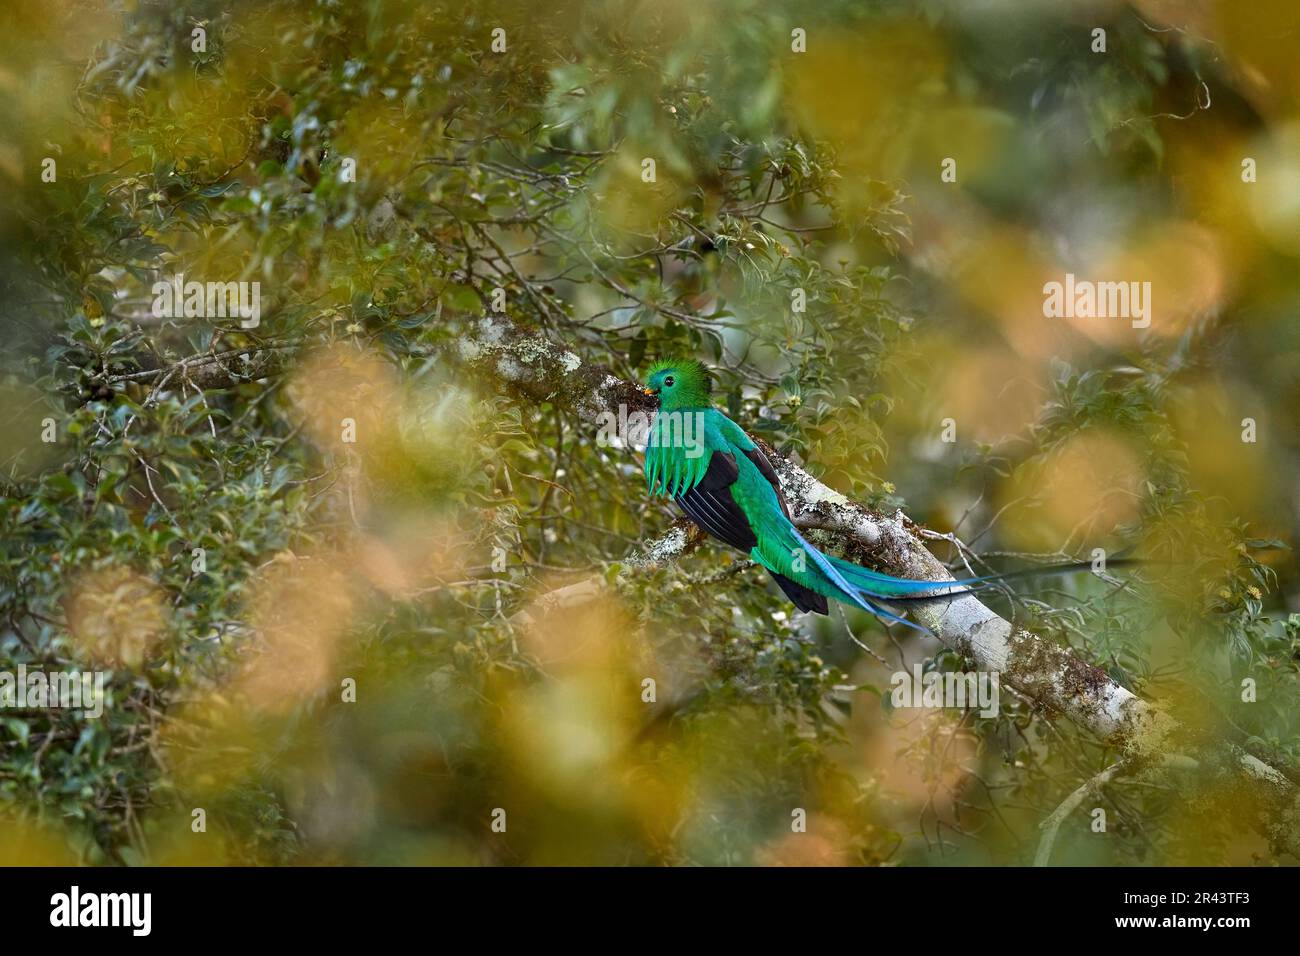 Resplendent Quetzal, Pharomachrus mocinno, from Chiapas, Mexico with blurred green forest in background. Magnificent sacred green and red bird. Detail Stock Photo